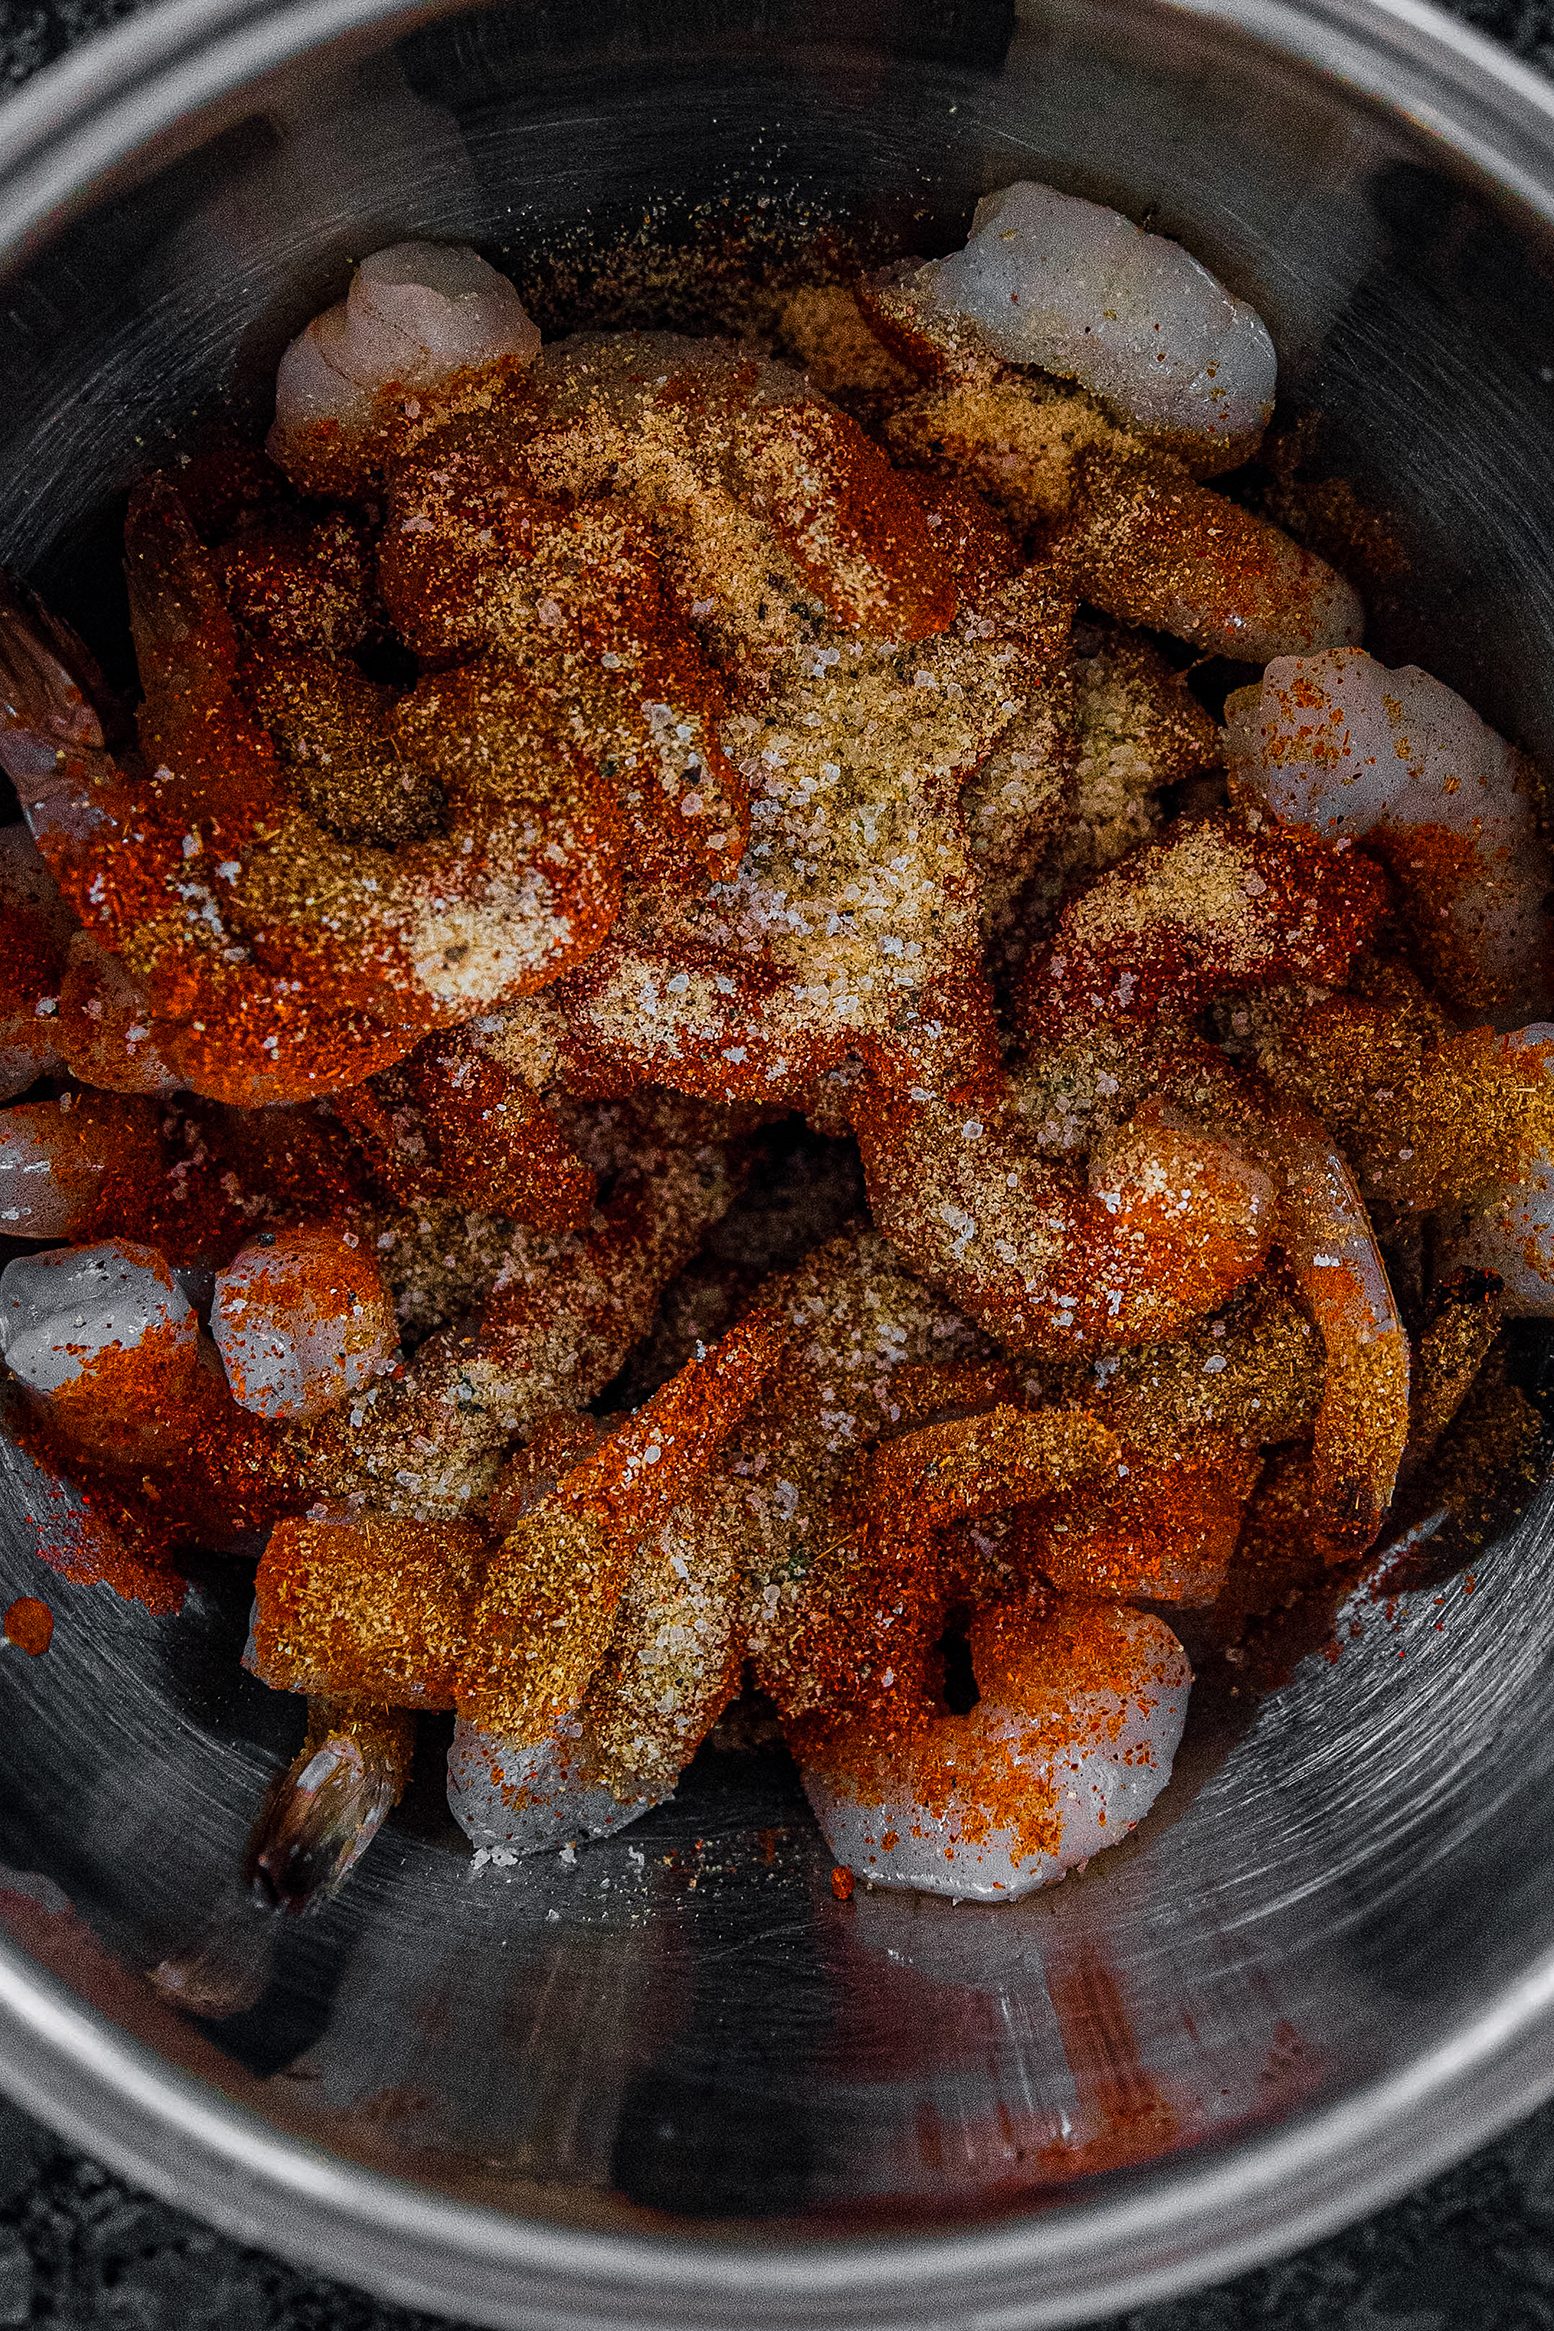 Mix in with all the shrimp.